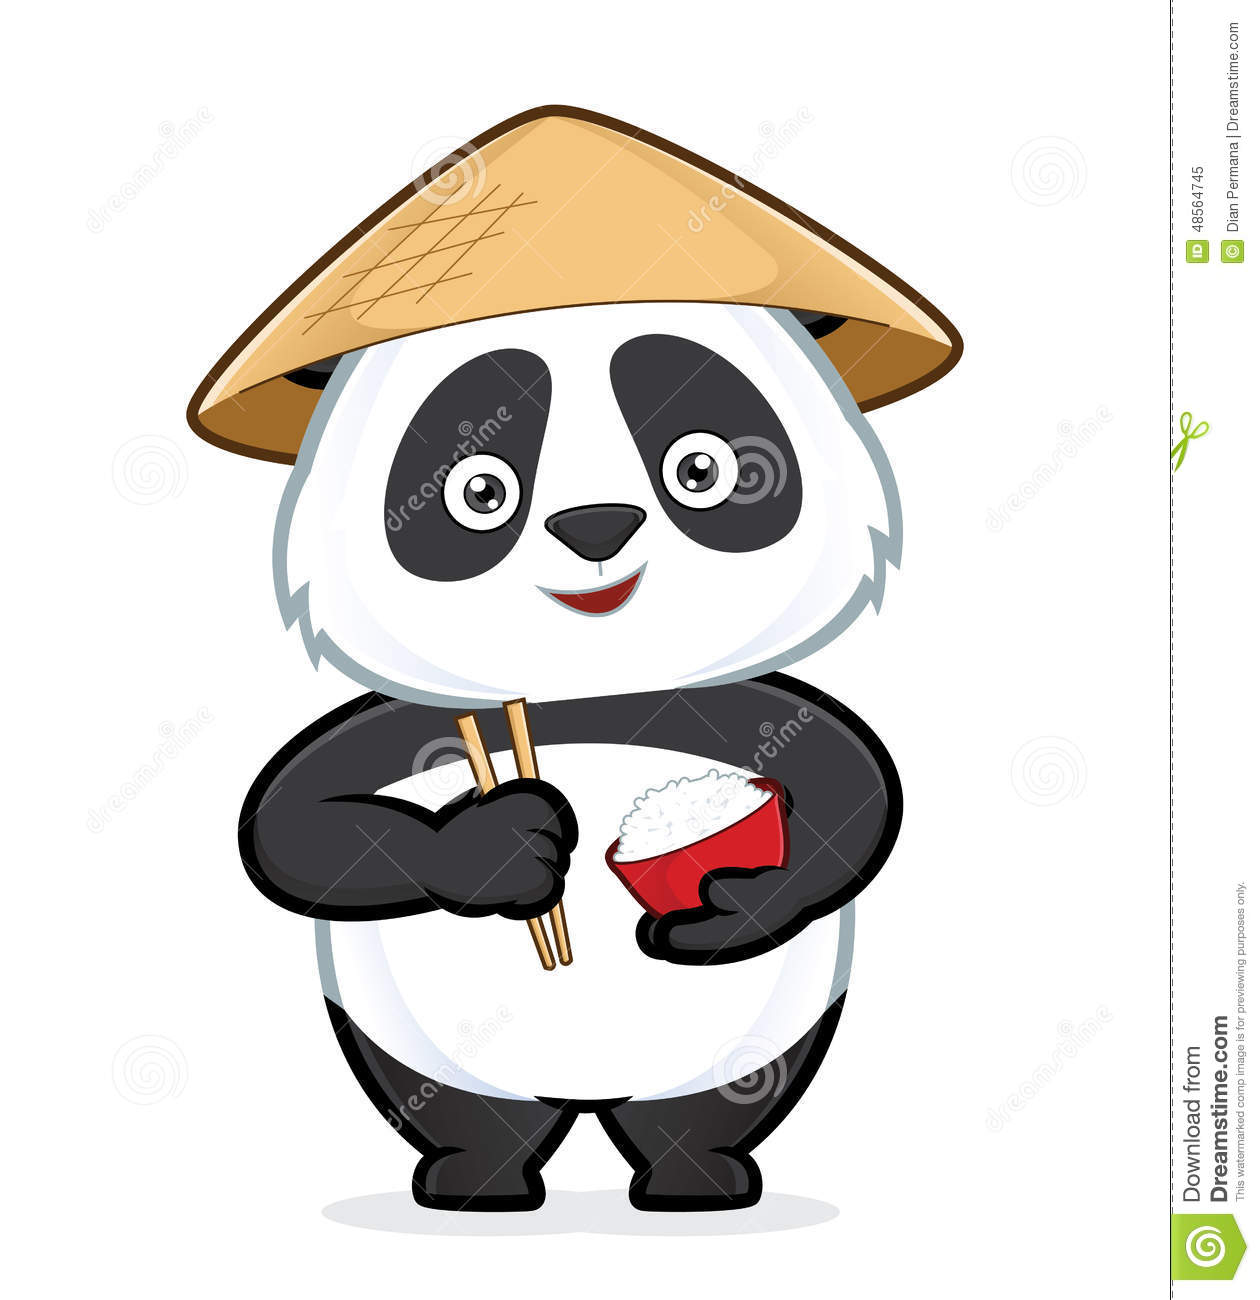 Cartoon pencil and in. Chopsticks clipart plate rice